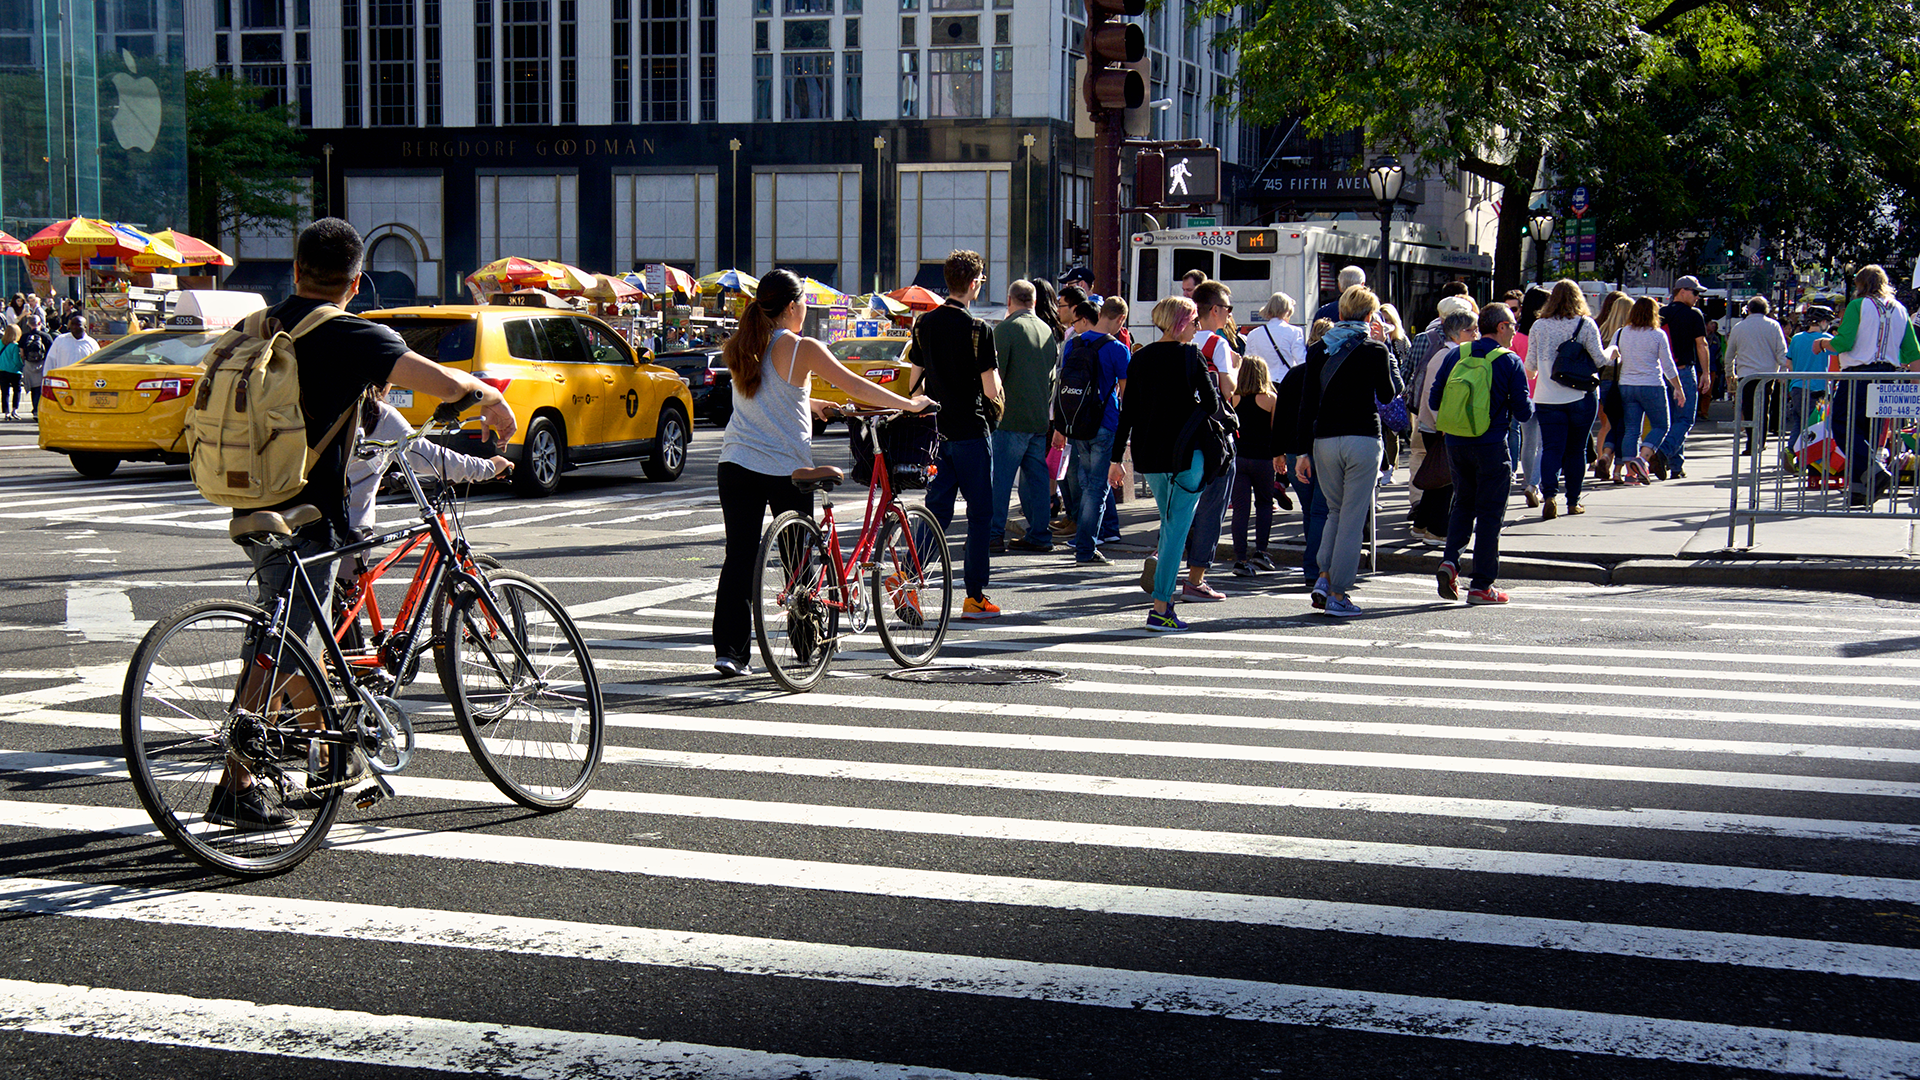 Pedestrians and bicyclists using a crosswalk in the city.